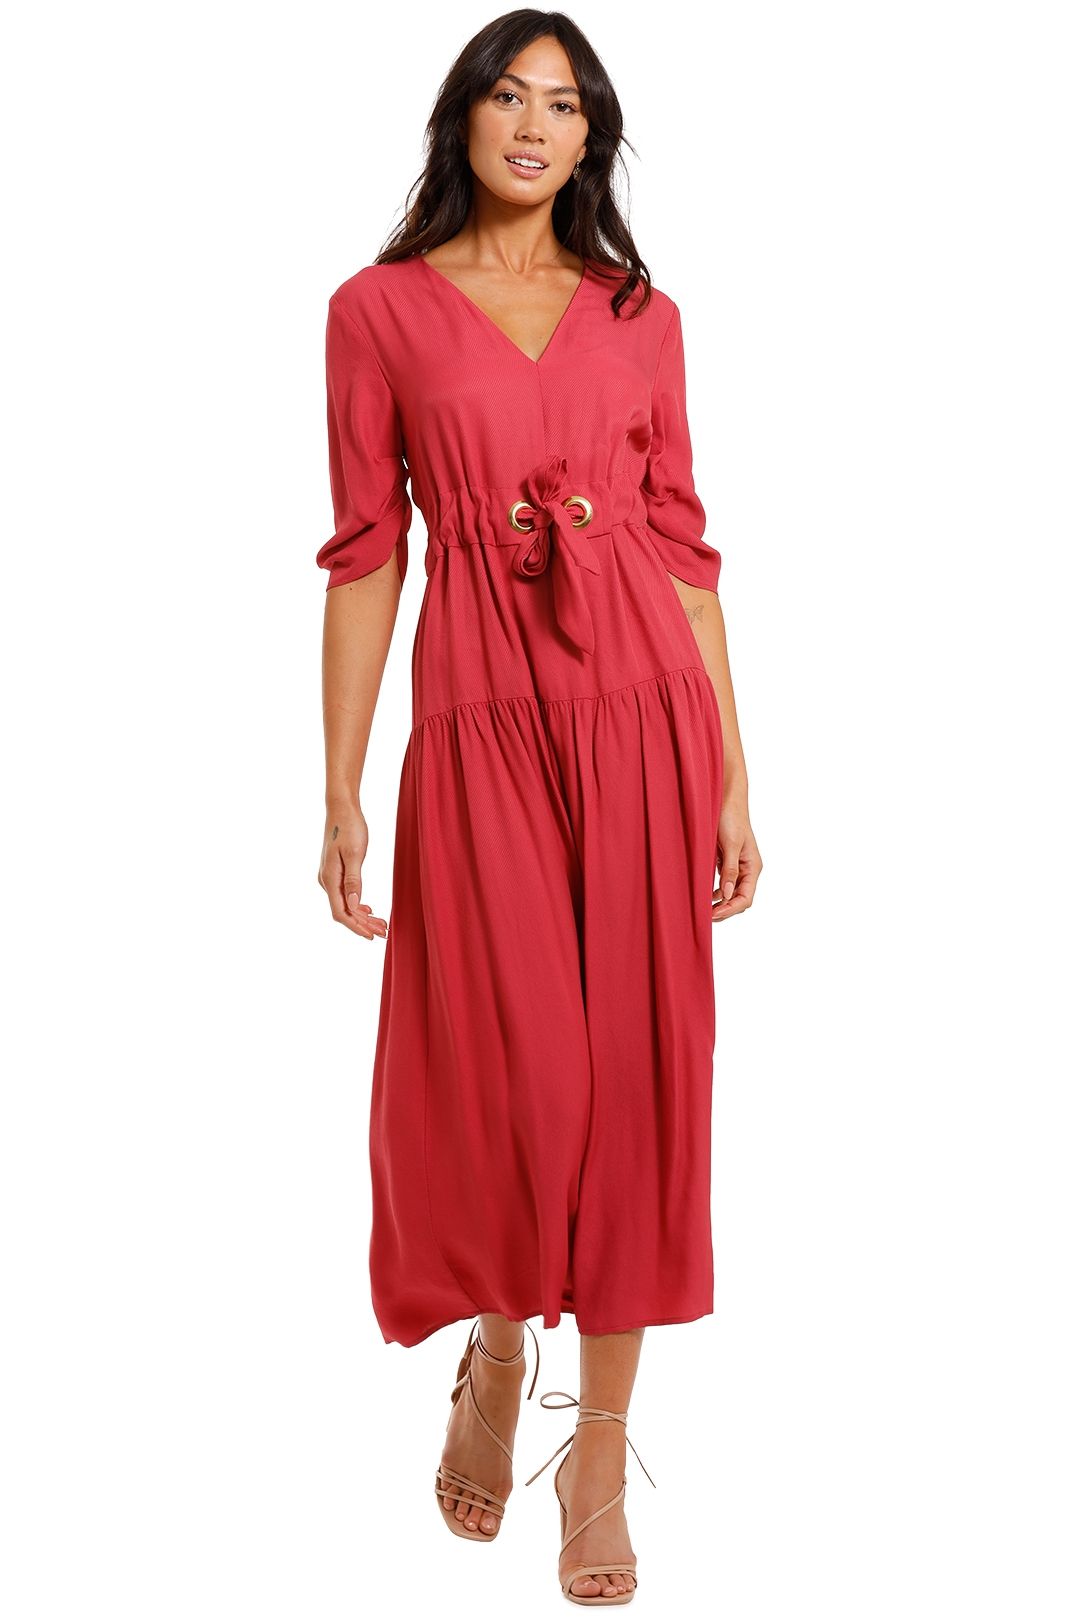 Kate Sylvester Conor Dress Raspberry pink